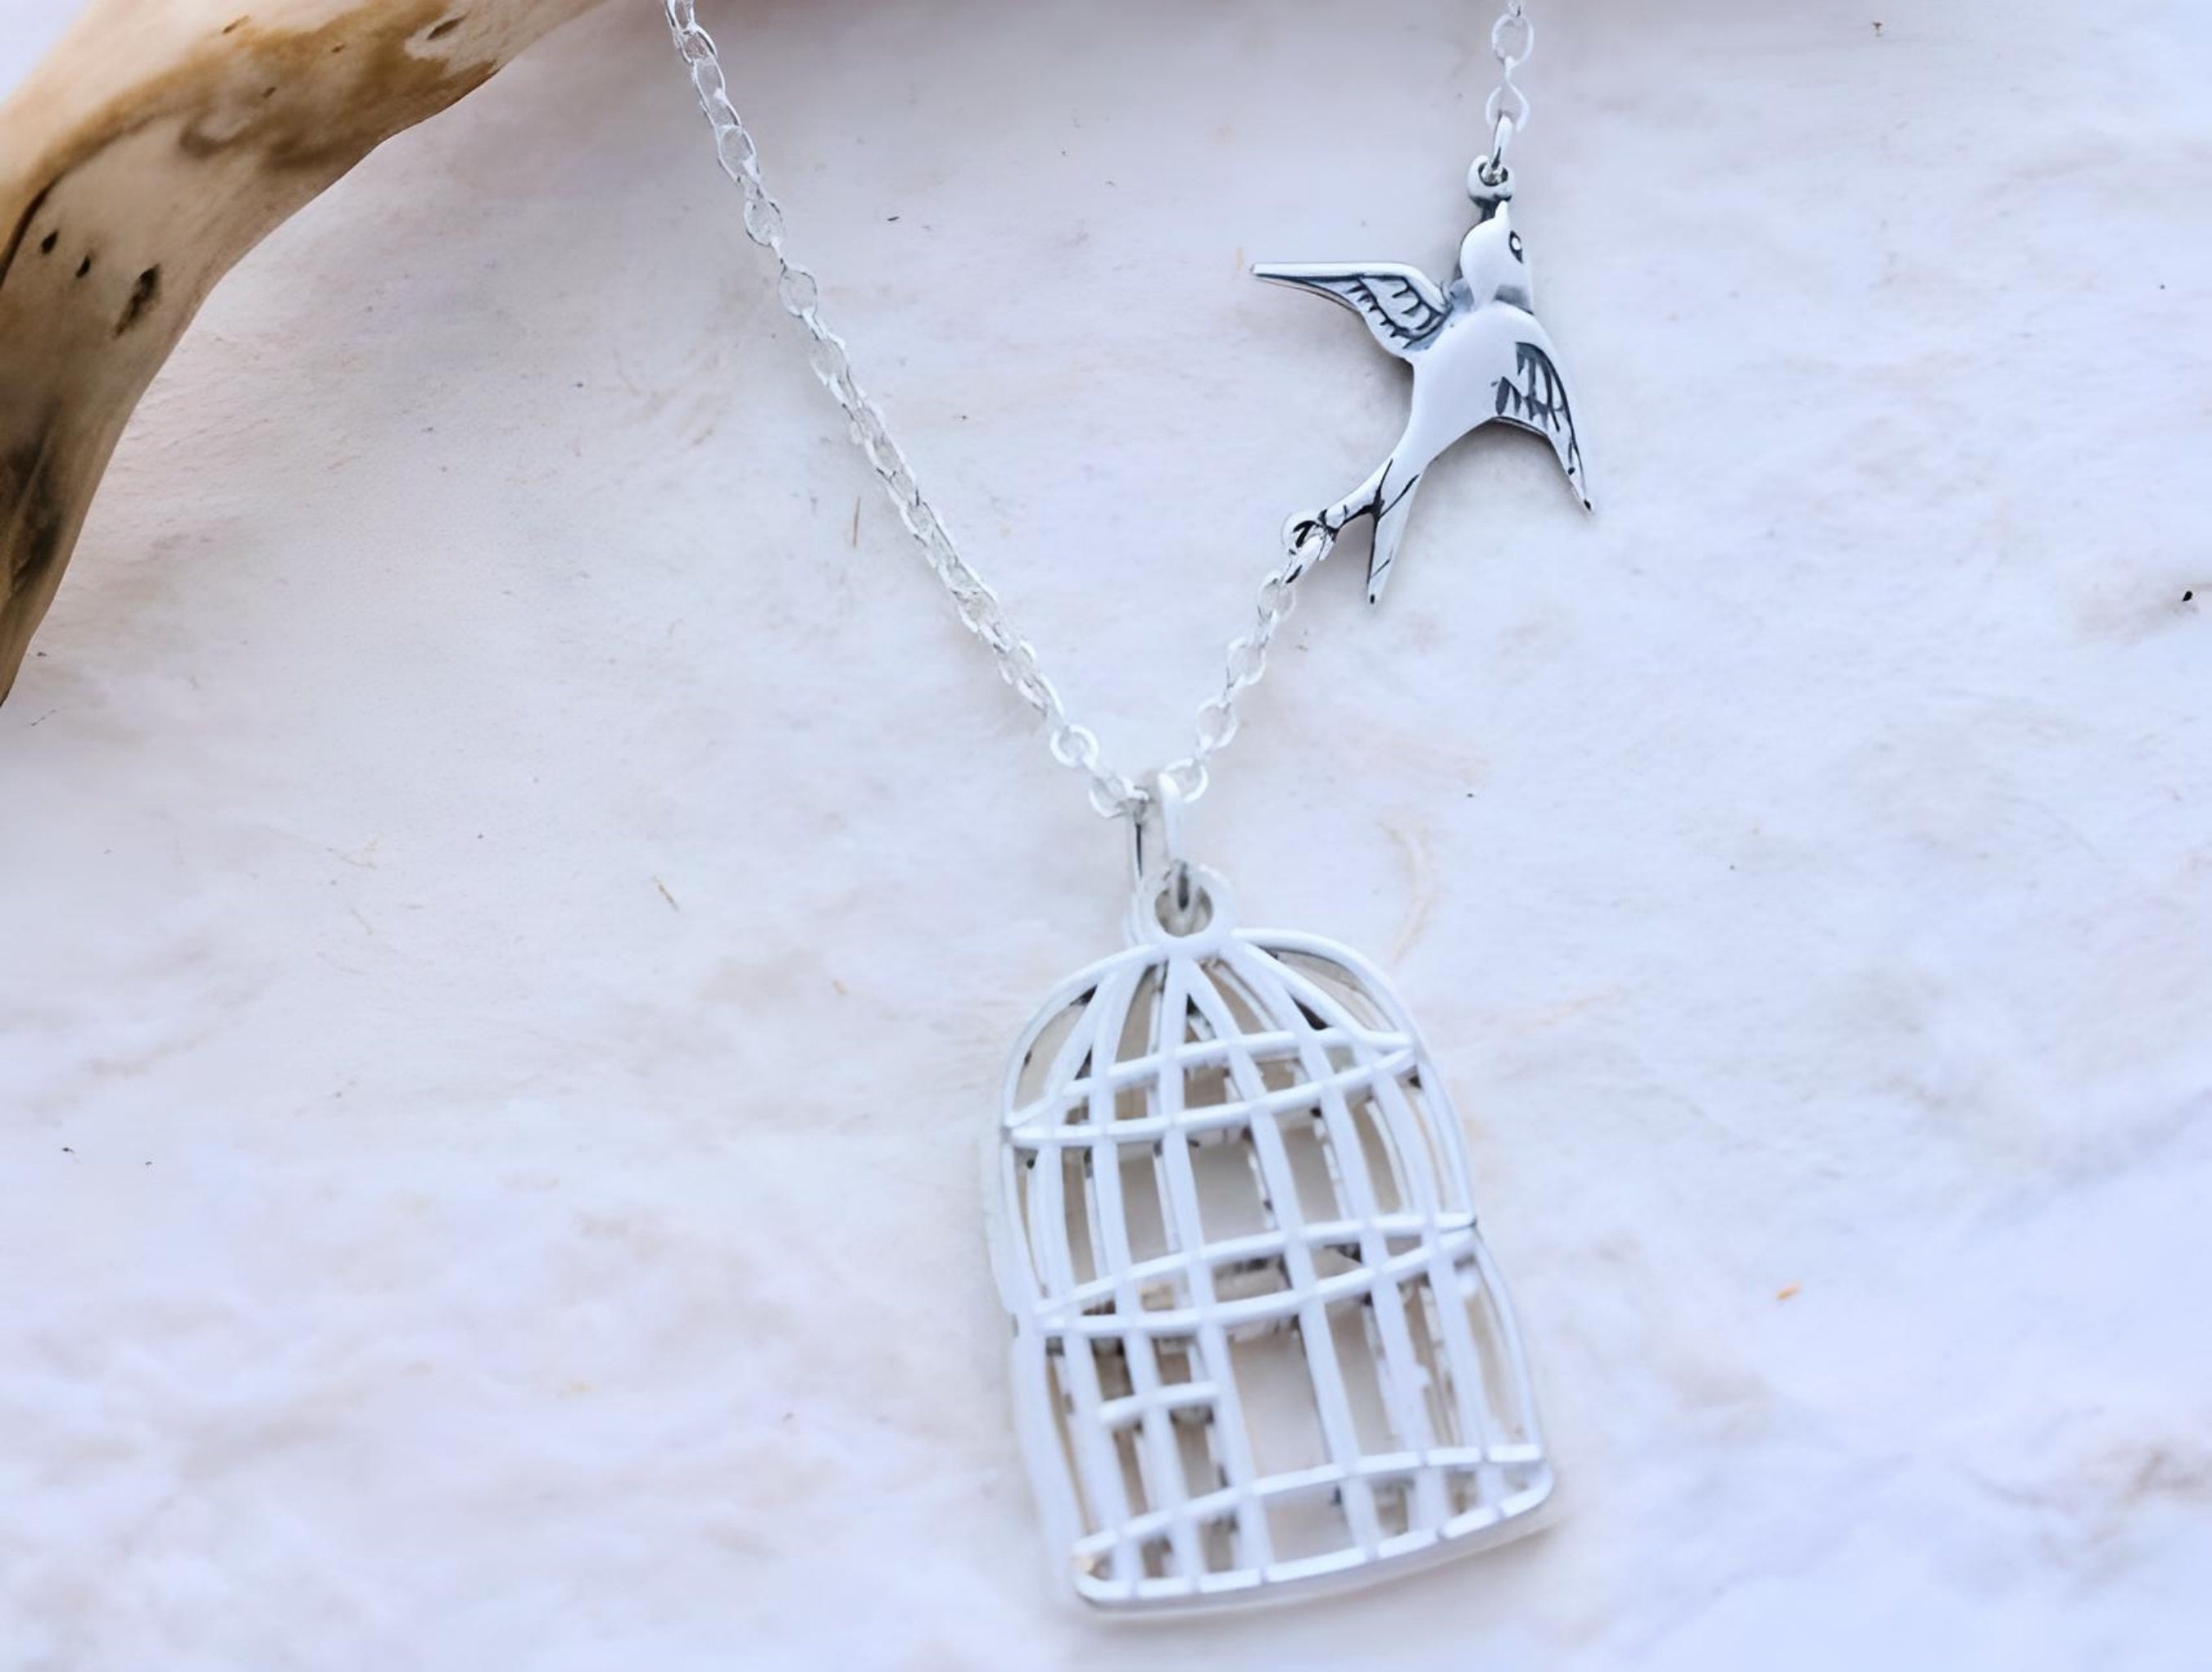 Bird Cage Chain Pendant Necklace – Ornaments and more